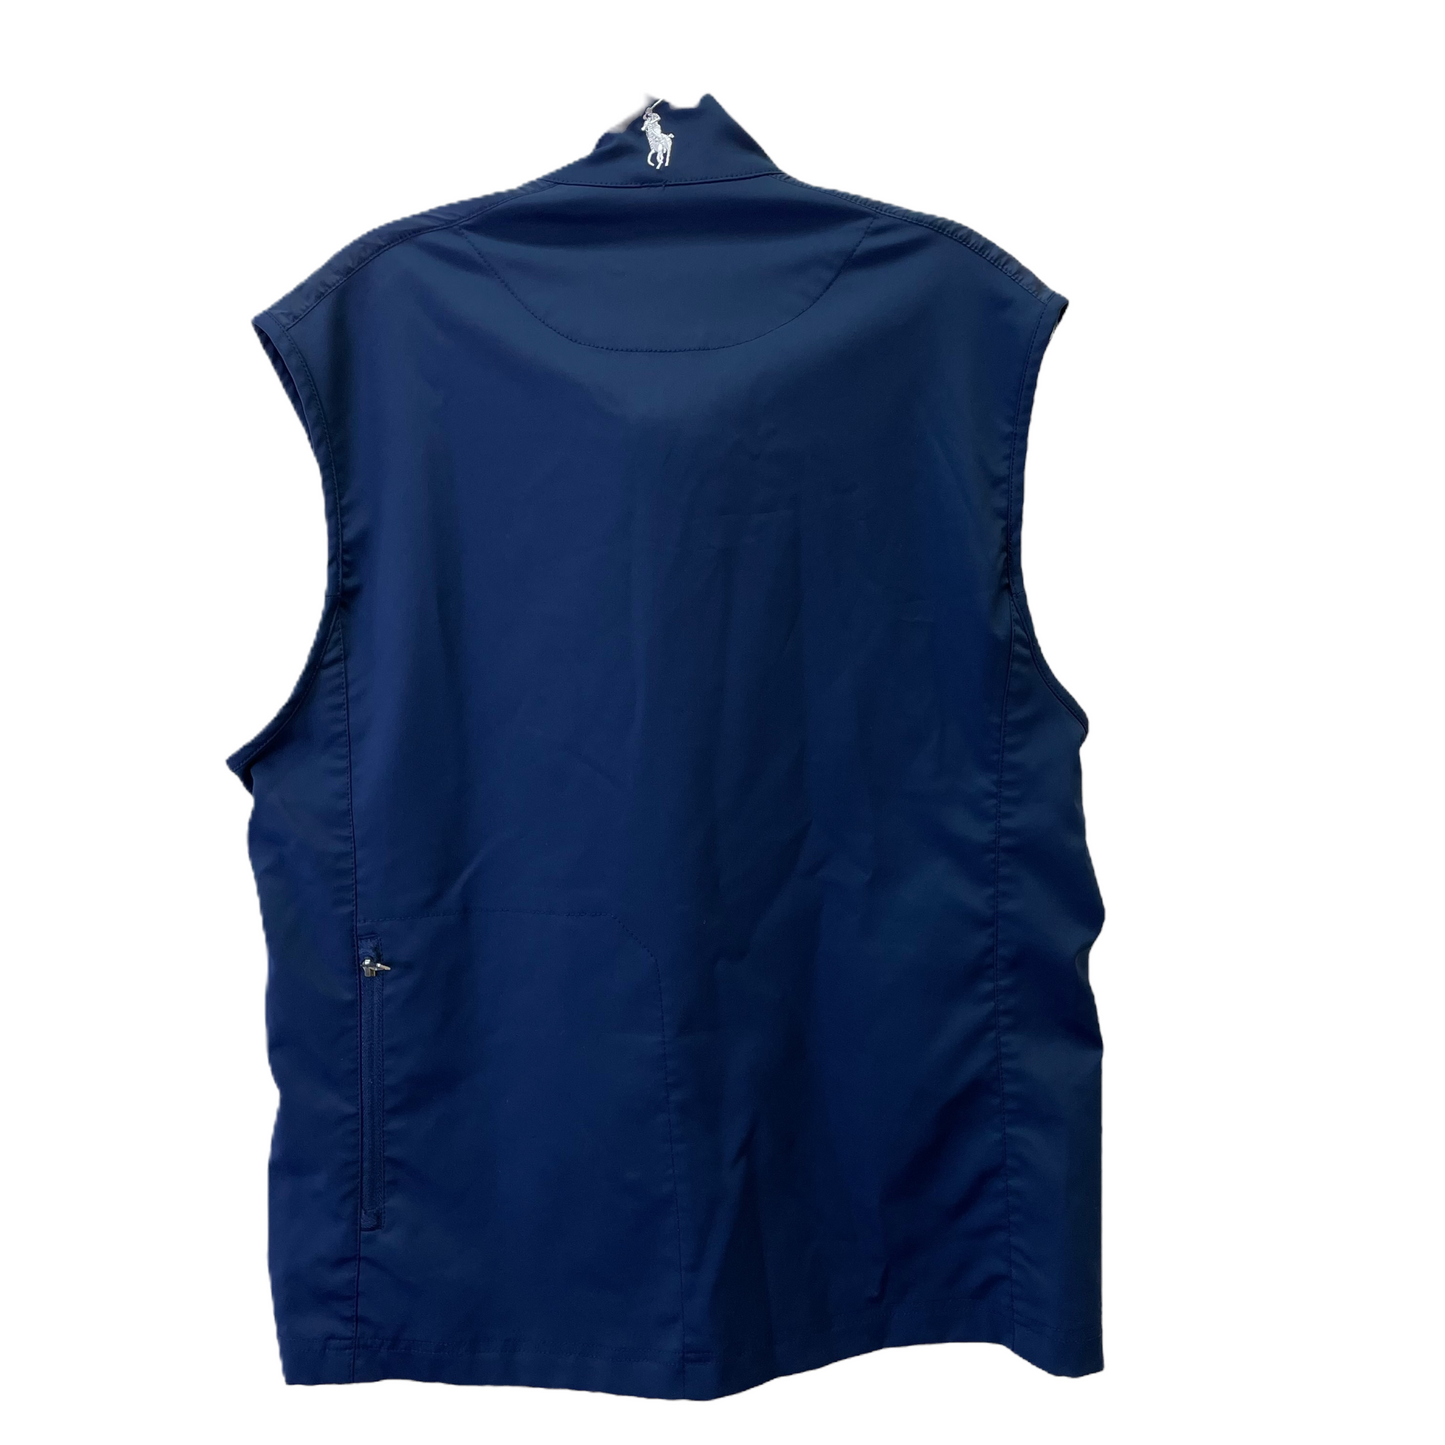 Navy Vest Other By Polo Ralph Lauren, Size: M